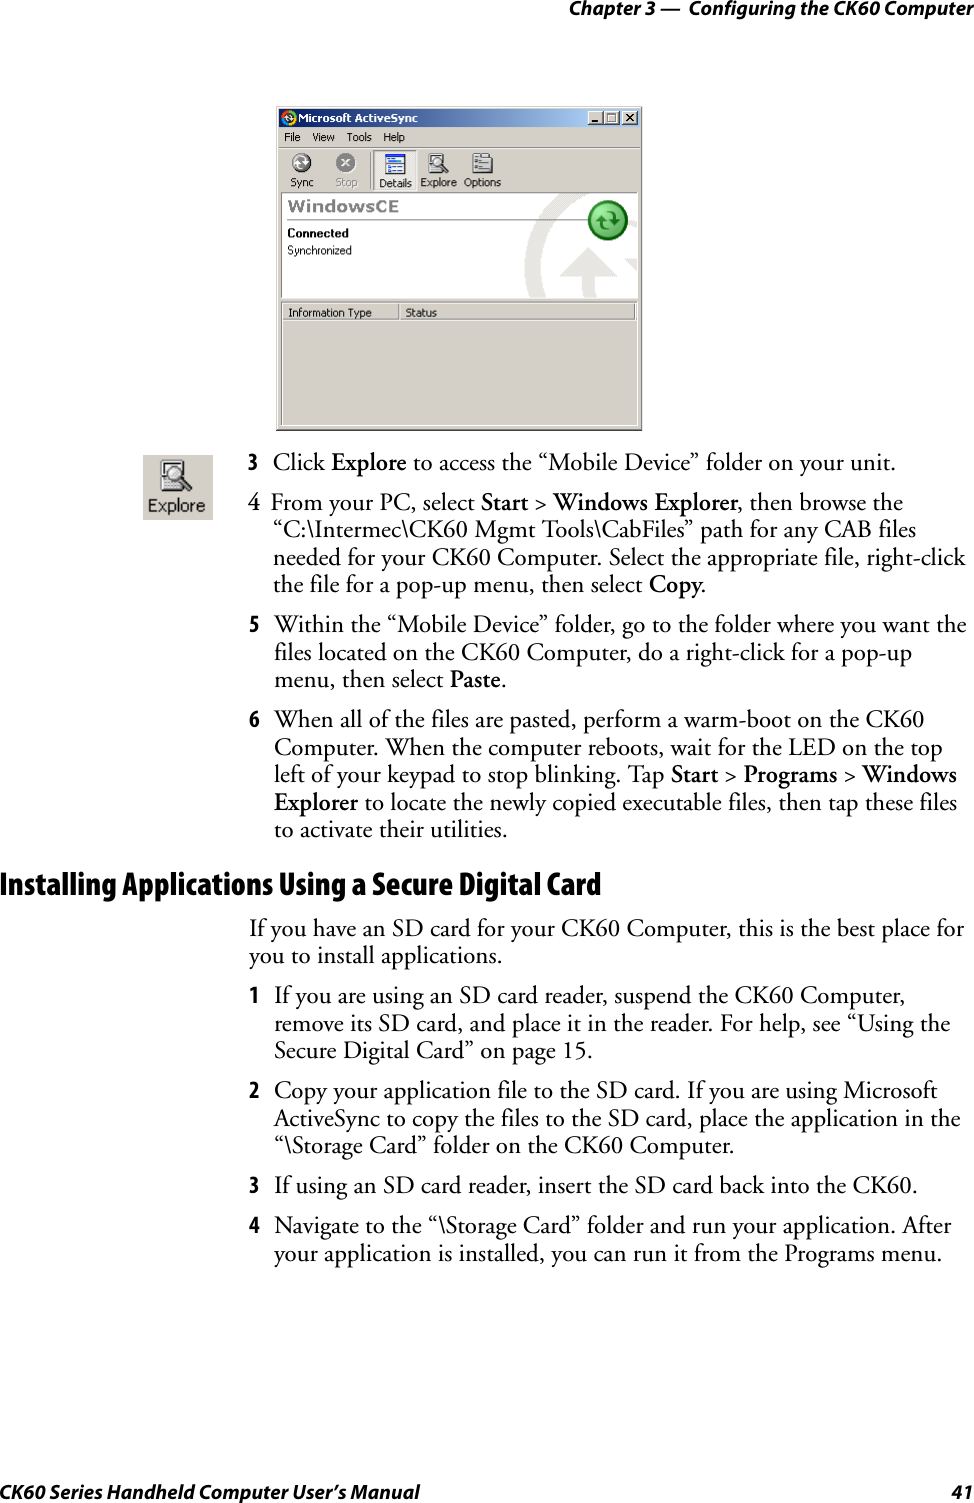 Chapter 3 —  Configuring the CK60 ComputerCK60 Series Handheld Computer User’s Manual 415Within the “Mobile Device” folder, go to the folder where you want the files located on the CK60 Computer, do a right-click for a pop-up menu, then select Paste.6When all of the files are pasted, perform a warm-boot on the CK60 Computer. When the computer reboots, wait for the LED on the top left of your keypad to stop blinking. Tap Start &gt; Programs &gt; Windows Explorer to locate the newly copied executable files, then tap these files to activate their utilities.Installing Applications Using a Secure Digital CardIf you have an SD card for your CK60 Computer, this is the best place for you to install applications.1If you are using an SD card reader, suspend the CK60 Computer, remove its SD card, and place it in the reader. For help, see “Using the Secure Digital Card” on page 15.2Copy your application file to the SD card. If you are using Microsoft ActiveSync to copy the files to the SD card, place the application in the “\Storage Card” folder on the CK60 Computer.3If using an SD card reader, insert the SD card back into the CK60.4Navigate to the “\Storage Card” folder and run your application. After your application is installed, you can run it from the Programs menu.3Click Explore to access the “Mobile Device” folder on your unit.4From your PC, select Start &gt; Windows Explorer, then browse the “C:\Intermec\CK60 Mgmt Tools\CabFiles” path for any CAB files needed for your CK60 Computer. Select the appropriate file, right-click the file for a pop-up menu, then select Copy.